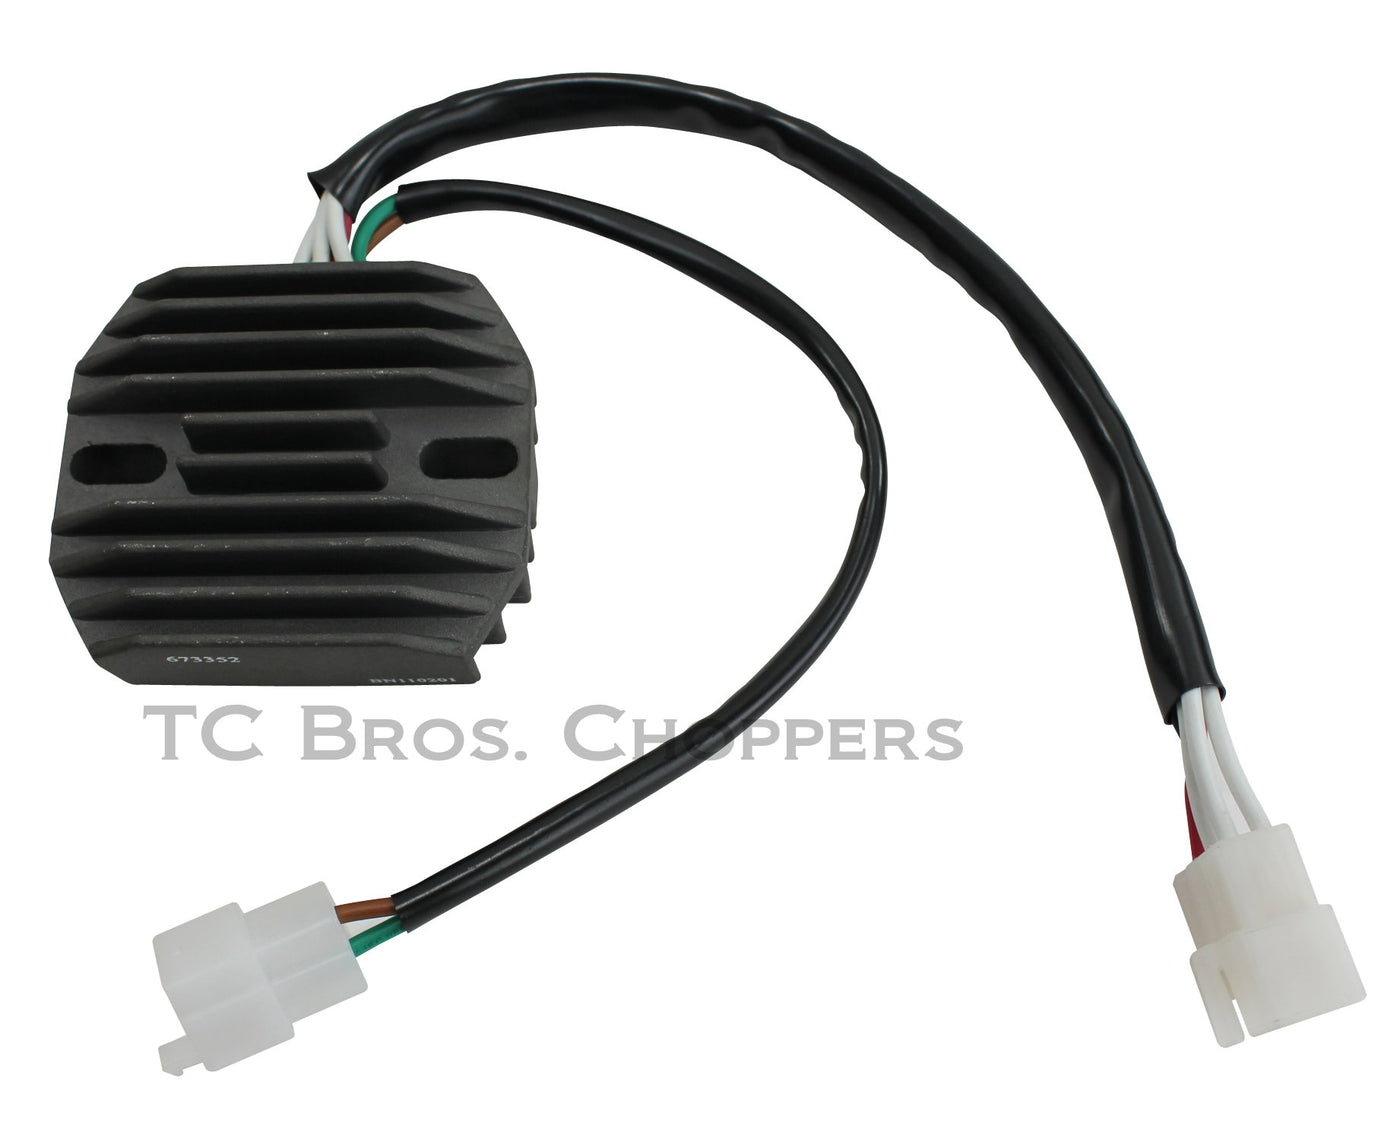 Tc bros cutters tc bros cutters tc bros cutters tc bros cutters plug in Electrosport solid state regulator/rectifier Yamaha XS650 (Points Ignition Models).